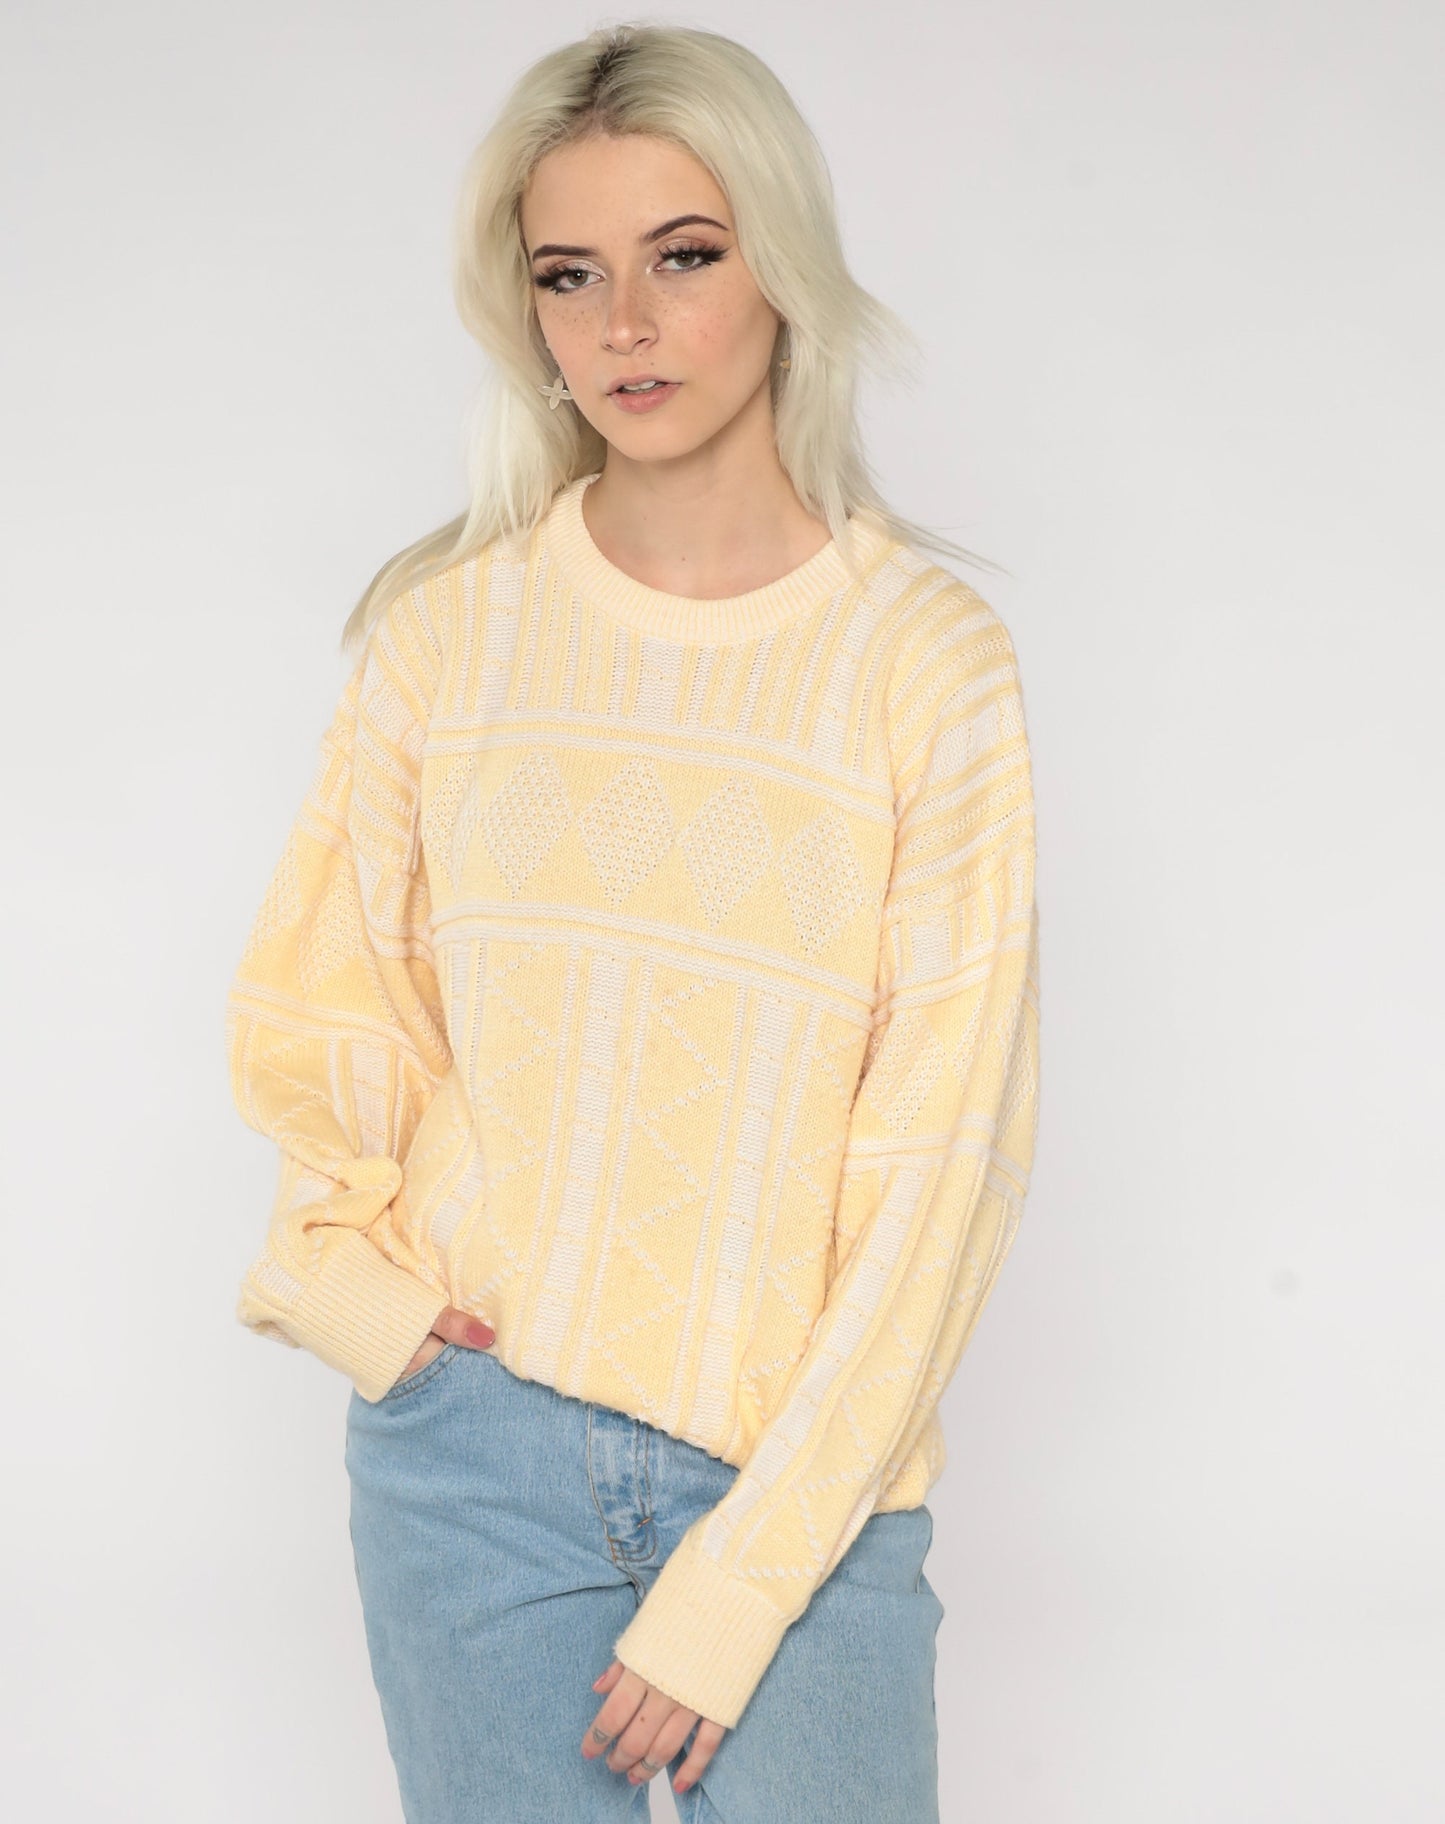 Yellow Knit Sweater 80s Geometric Pastel Sweater Jacquard Print 1980s Vintage Knitwear Pullover Spring Sweater Retro Cozy Kawaii Large L